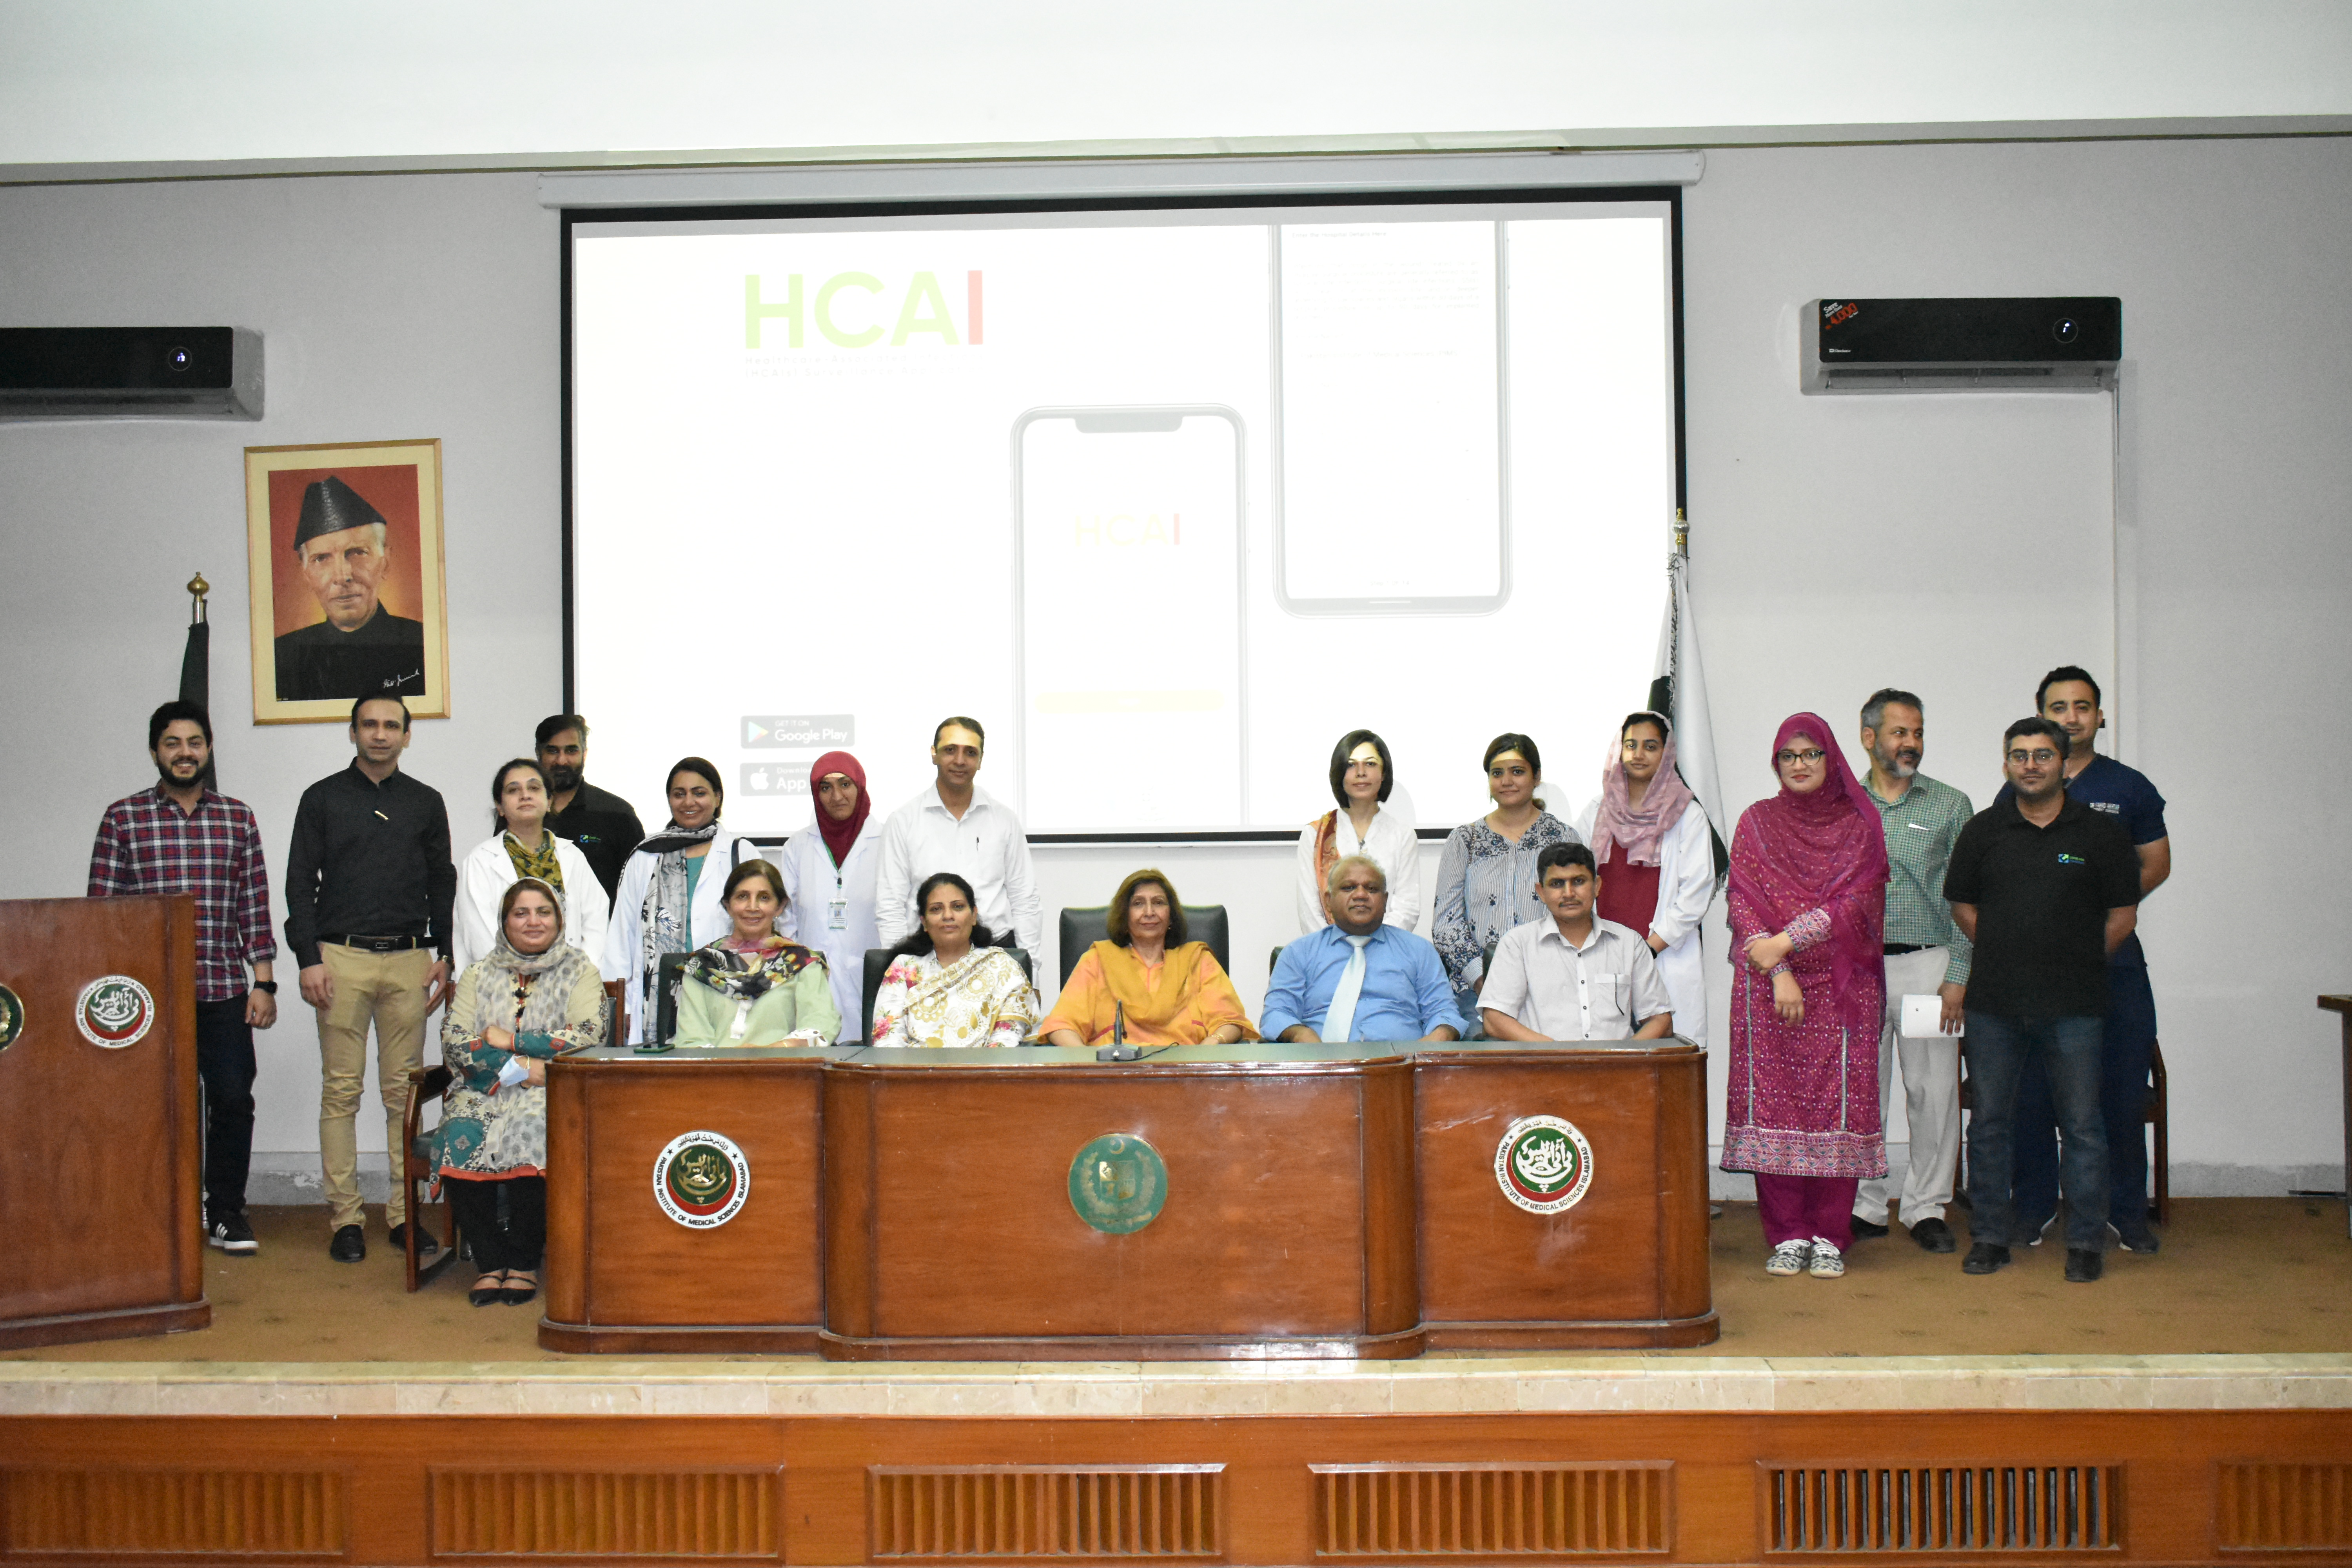 Team CfP gives a training session to PIMS team on the HCAI Surveillance Application